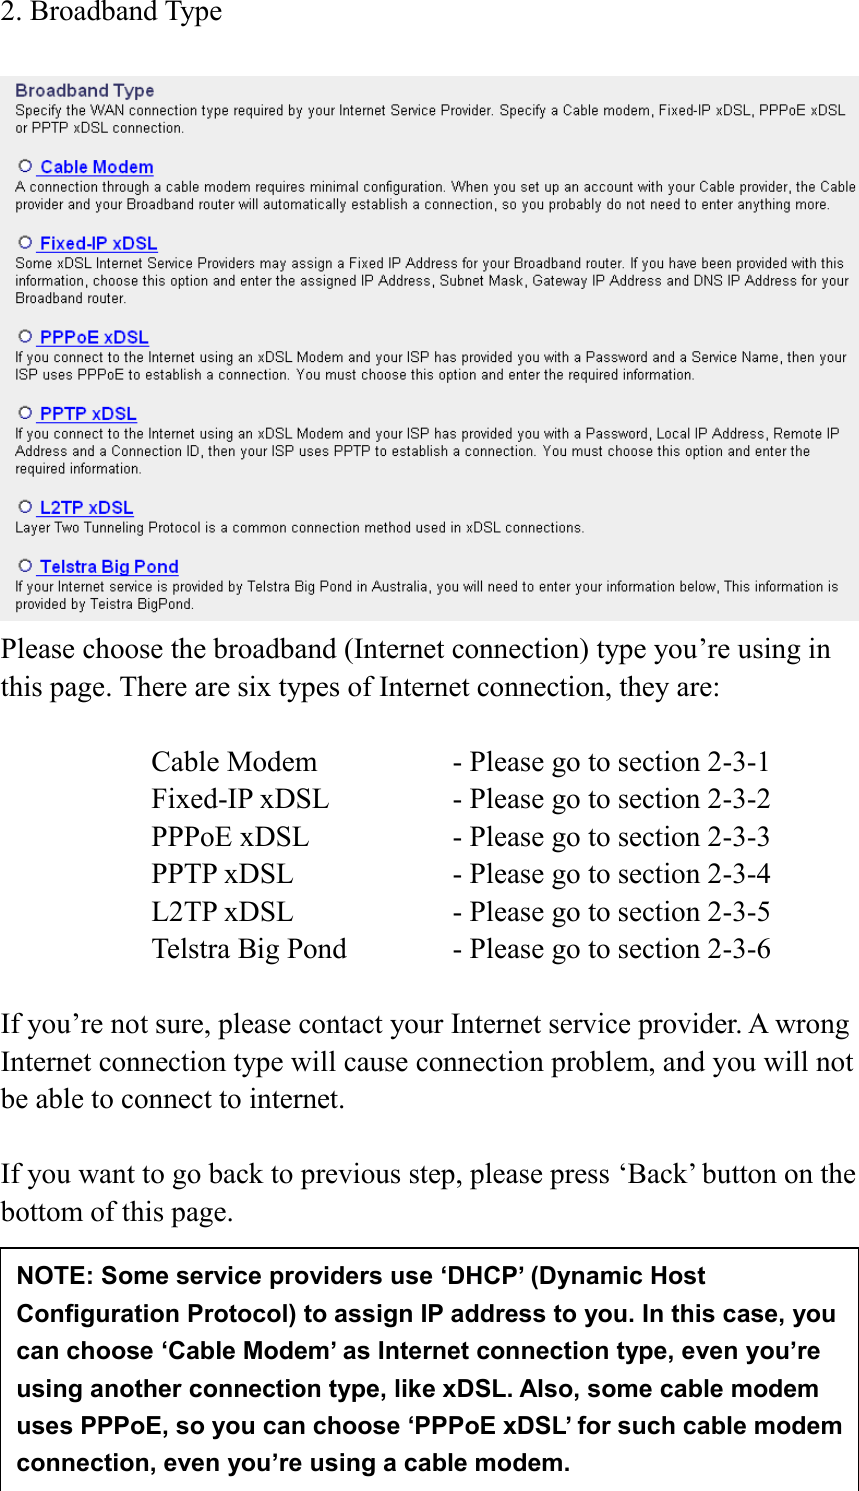 25 2. Broadband Type   Please choose the broadband (Internet connection) type you’re using in this page. There are six types of Internet connection, they are:  Cable Modem      - Please go to section 2-3-1 Fixed-IP xDSL      - Please go to section 2-3-2 PPPoE xDSL      - Please go to section 2-3-3 PPTP xDSL       - Please go to section 2-3-4 L2TP xDSL       - Please go to section 2-3-5 Telstra Big Pond     - Please go to section 2-3-6  If you’re not sure, please contact your Internet service provider. A wrong Internet connection type will cause connection problem, and you will not be able to connect to internet.  If you want to go back to previous step, please press ‘Back’ button on the bottom of this page.      NOTE: Some service providers use ‘DHCP’ (Dynamic Host Configuration Protocol) to assign IP address to you. In this case, you can choose ‘Cable Modem’ as Internet connection type, even you’re using another connection type, like xDSL. Also, some cable modem uses PPPoE, so you can choose ‘PPPoE xDSL’ for such cable modem connection, even you’re using a cable modem. 